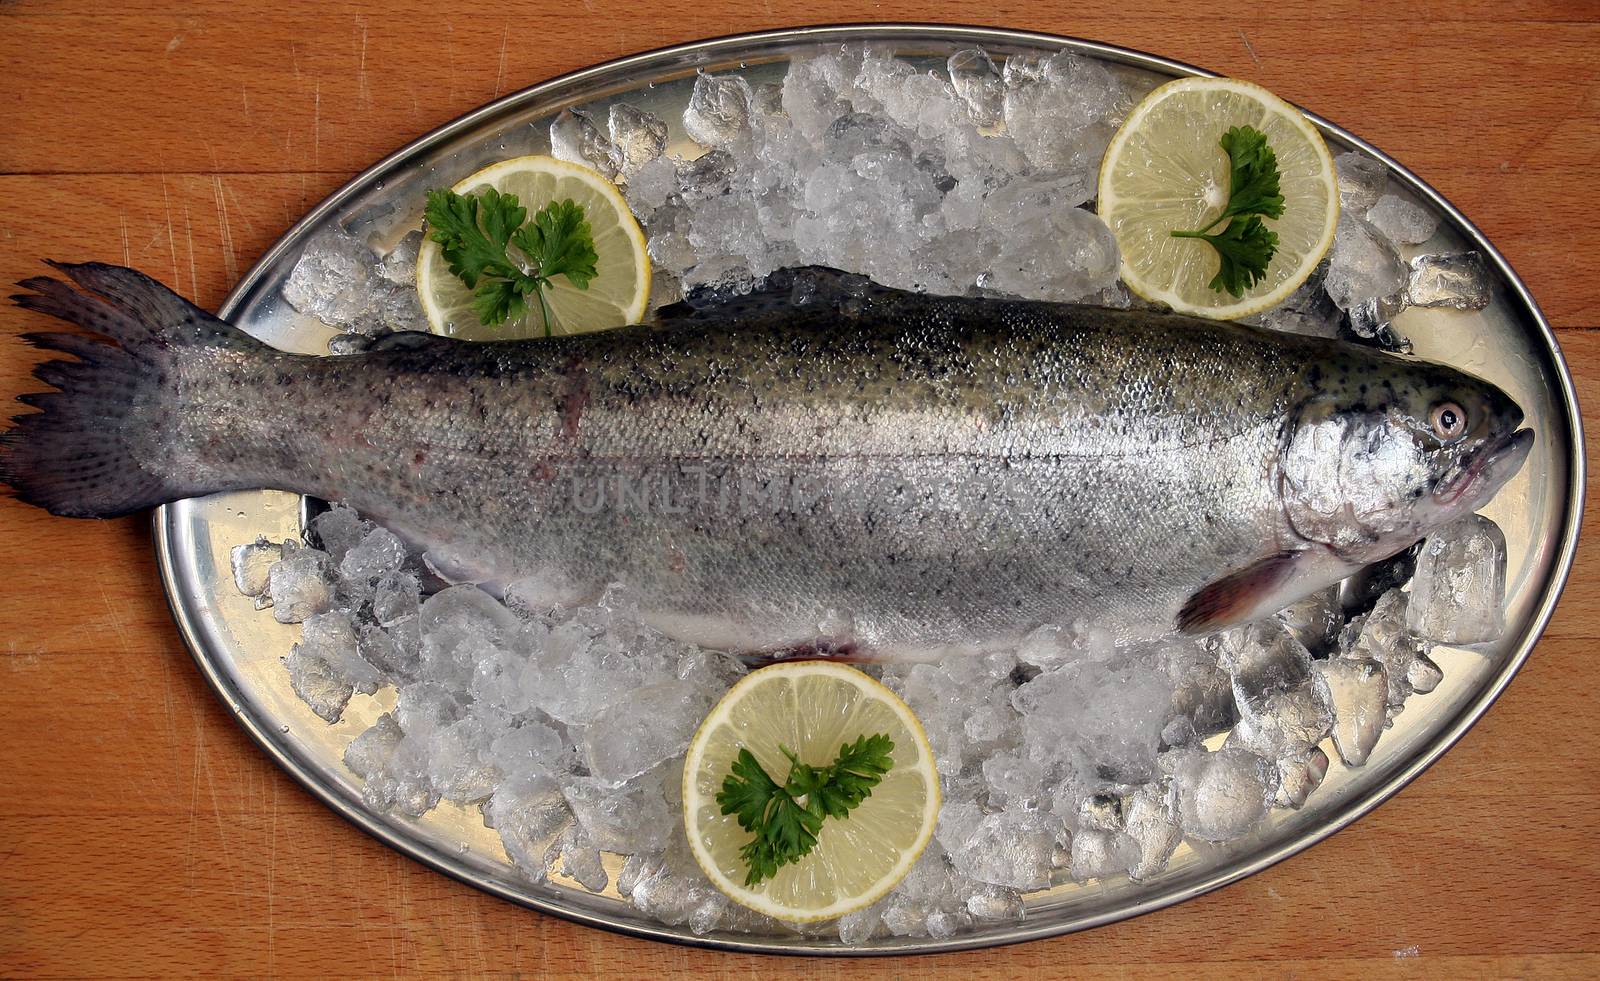 Raw trout lies on a dish with slices of lemon.